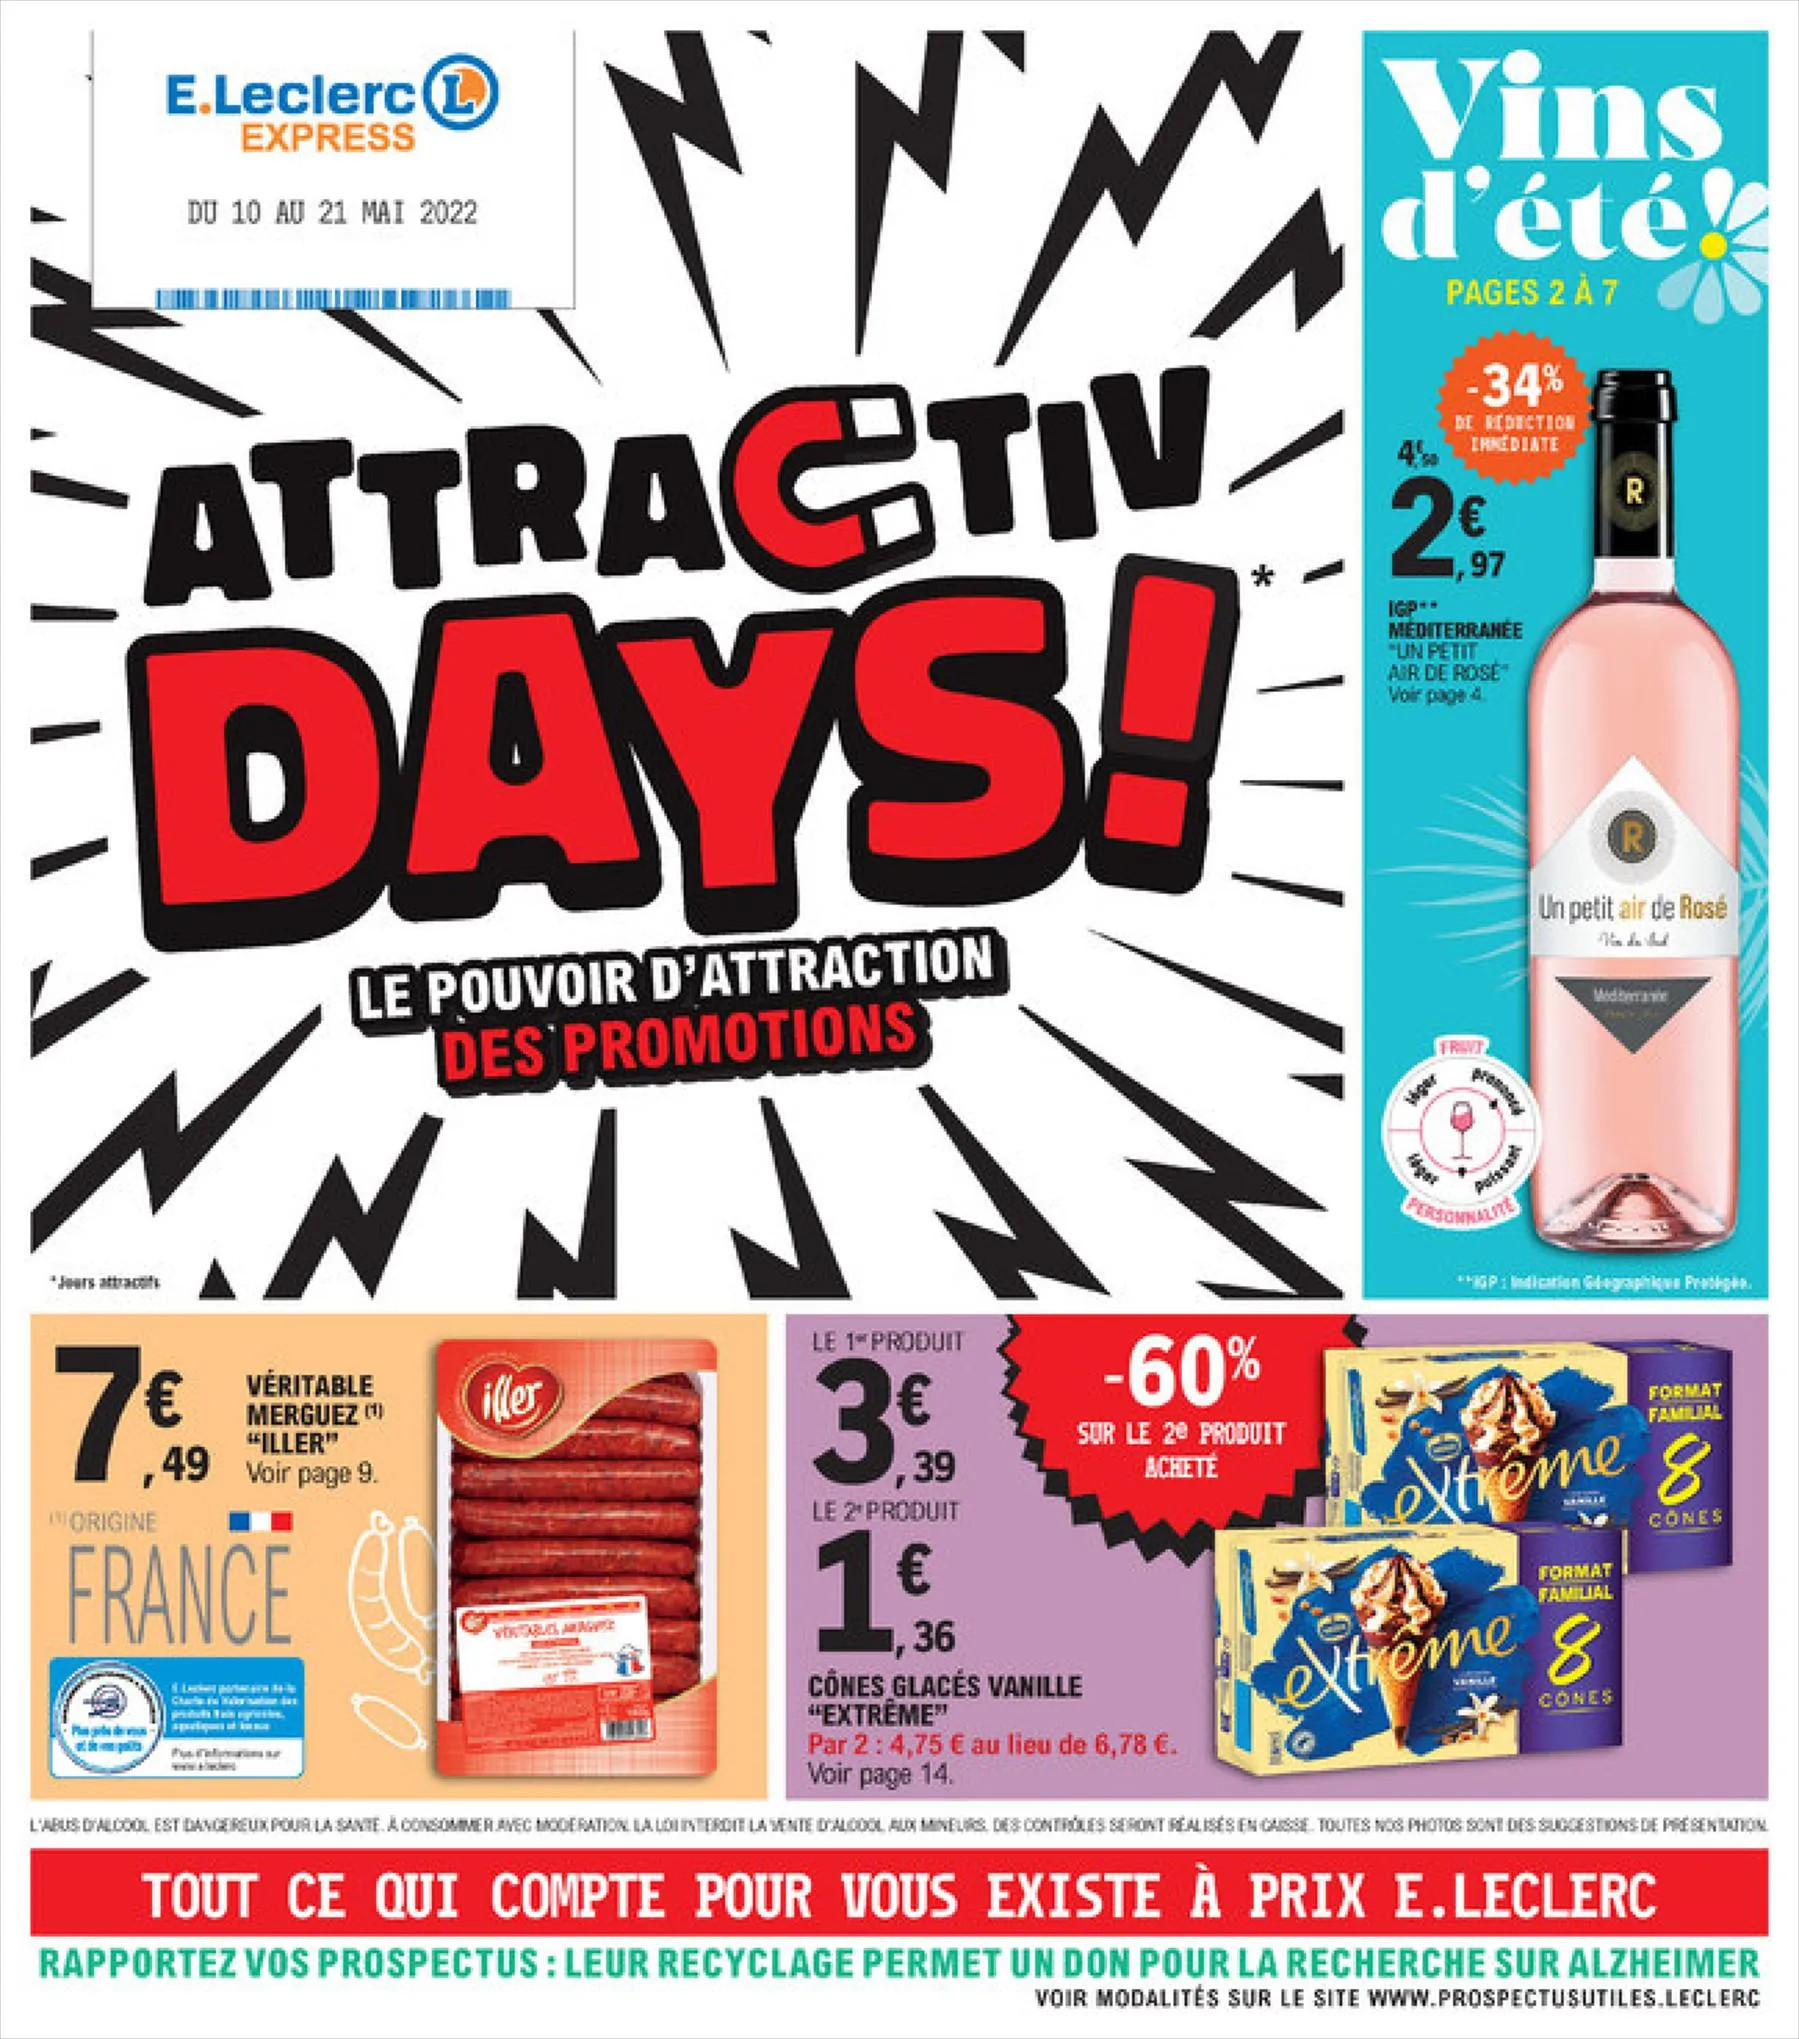 Catalogue ATTRACTIV DAYS!, page 00001